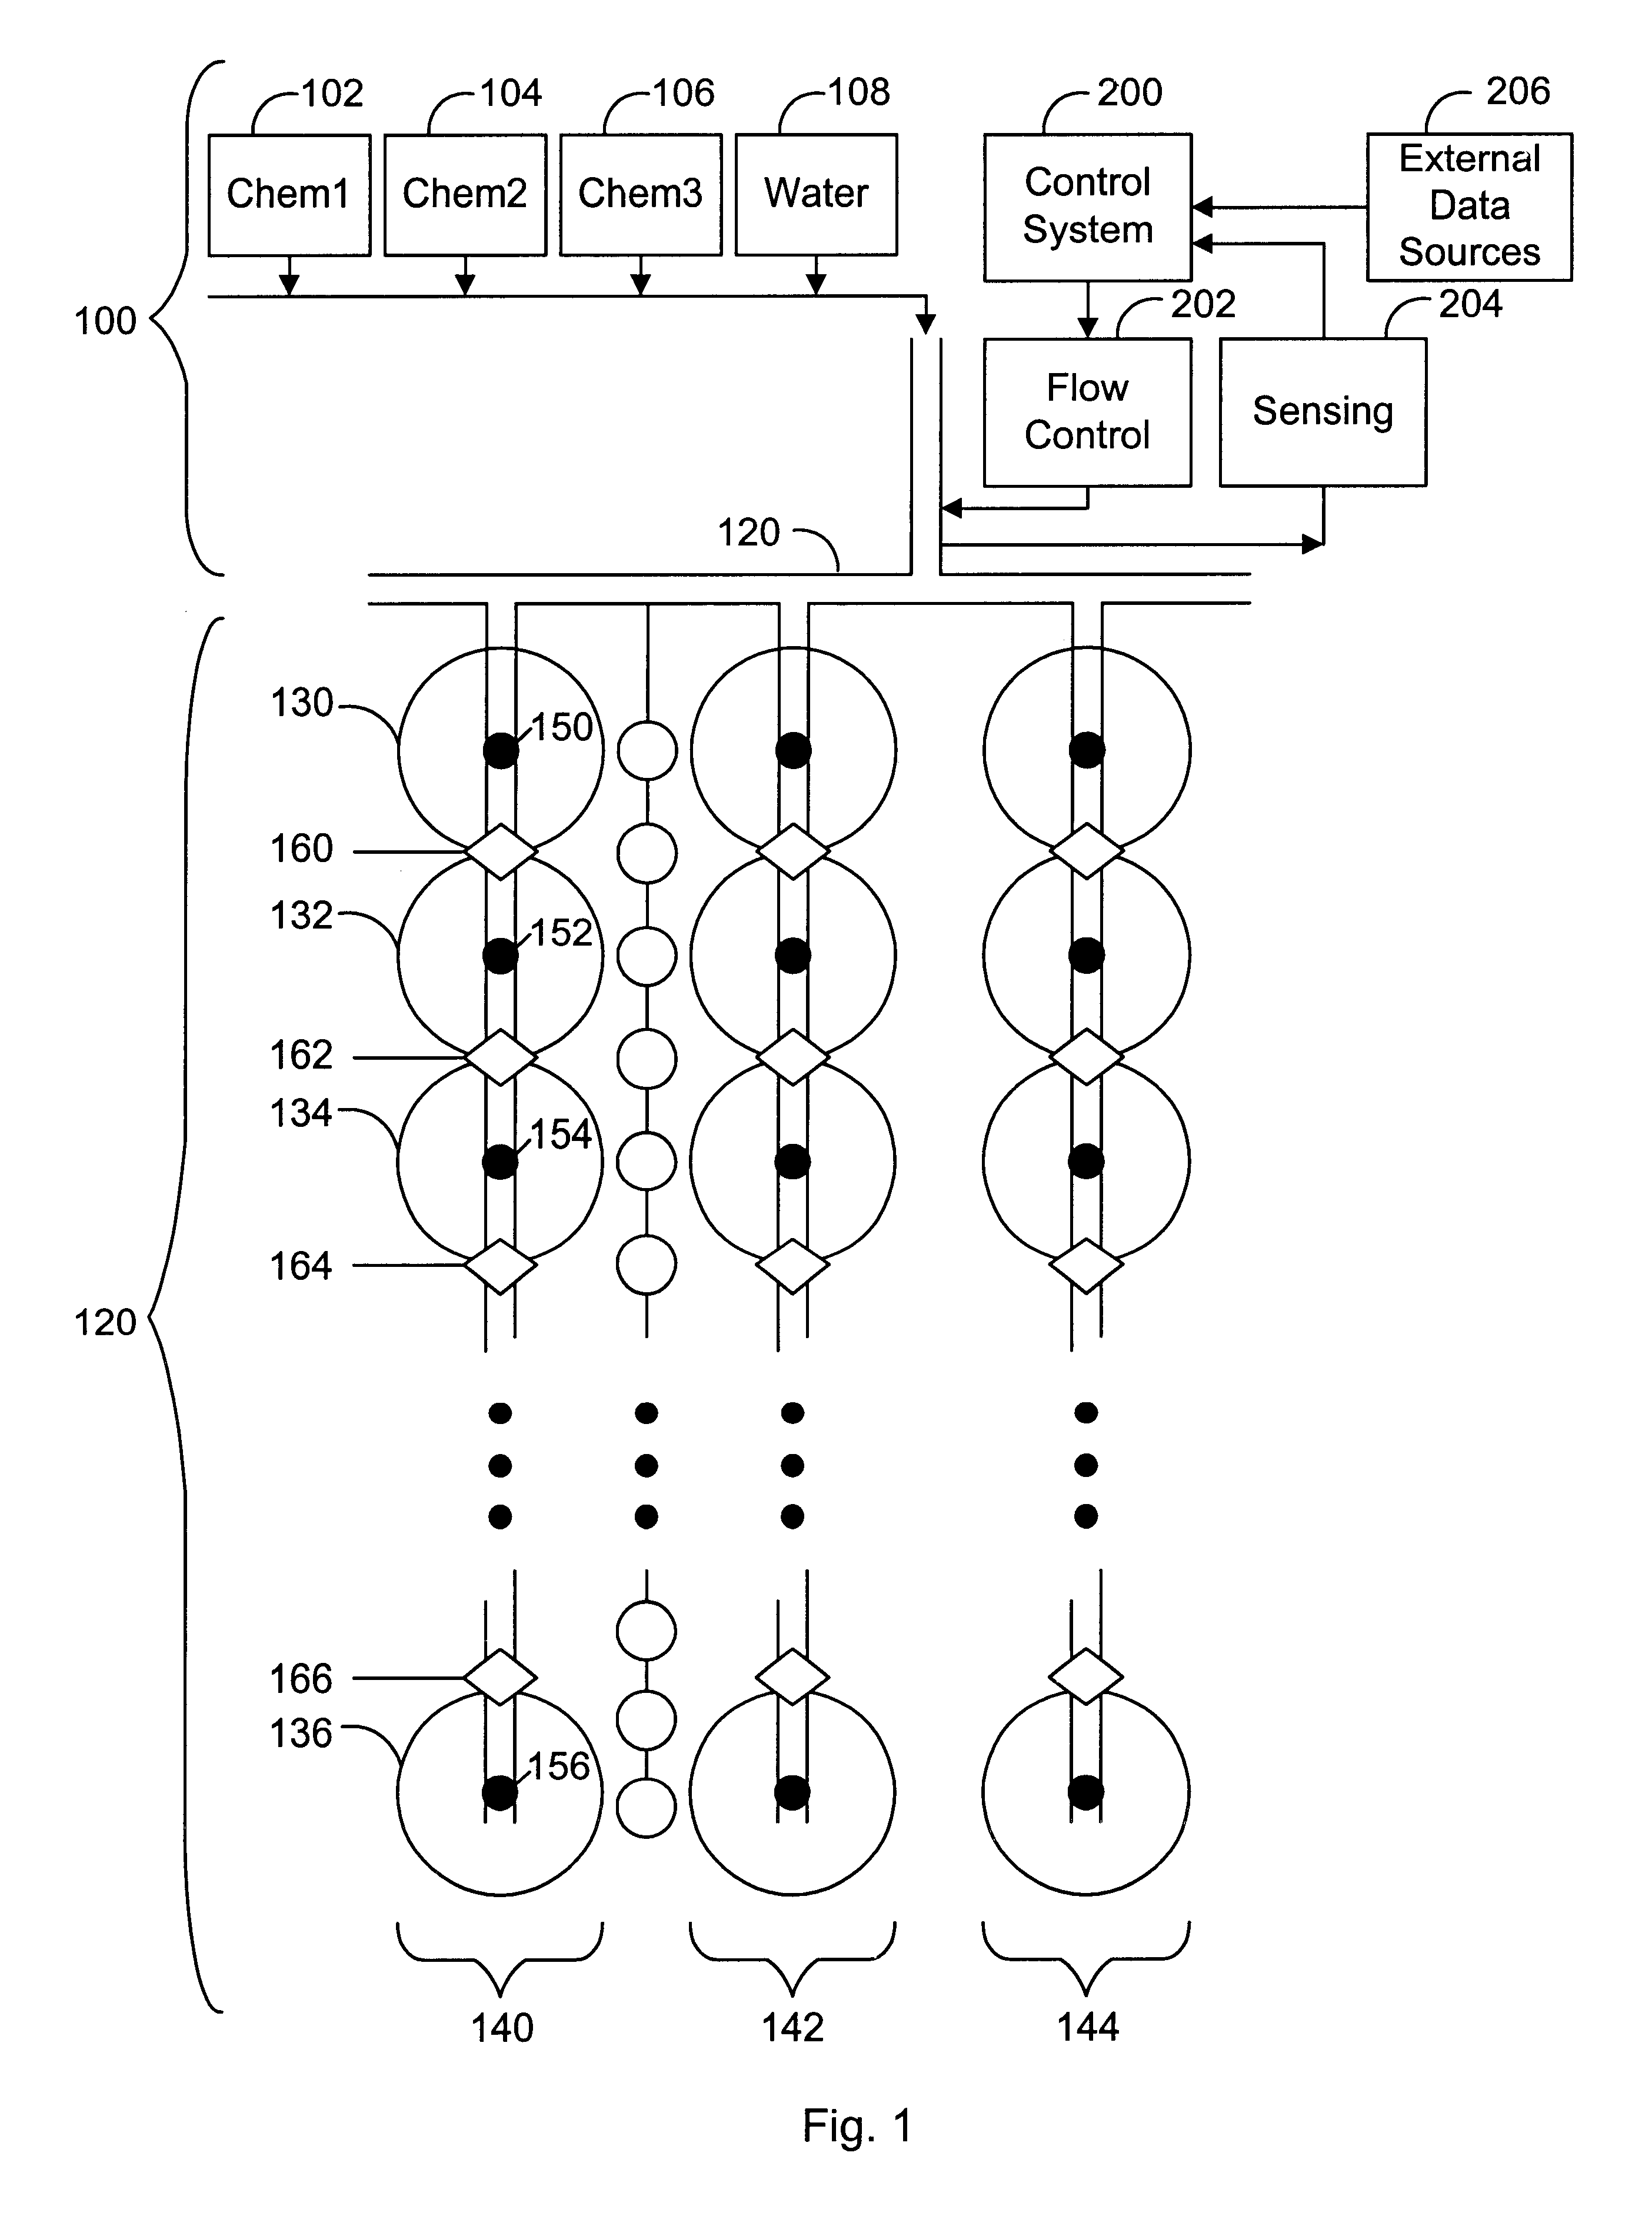 System for automated monitoring and maintenance of crops including computer control of irrigation and chemical delivery using multiple channel conduit